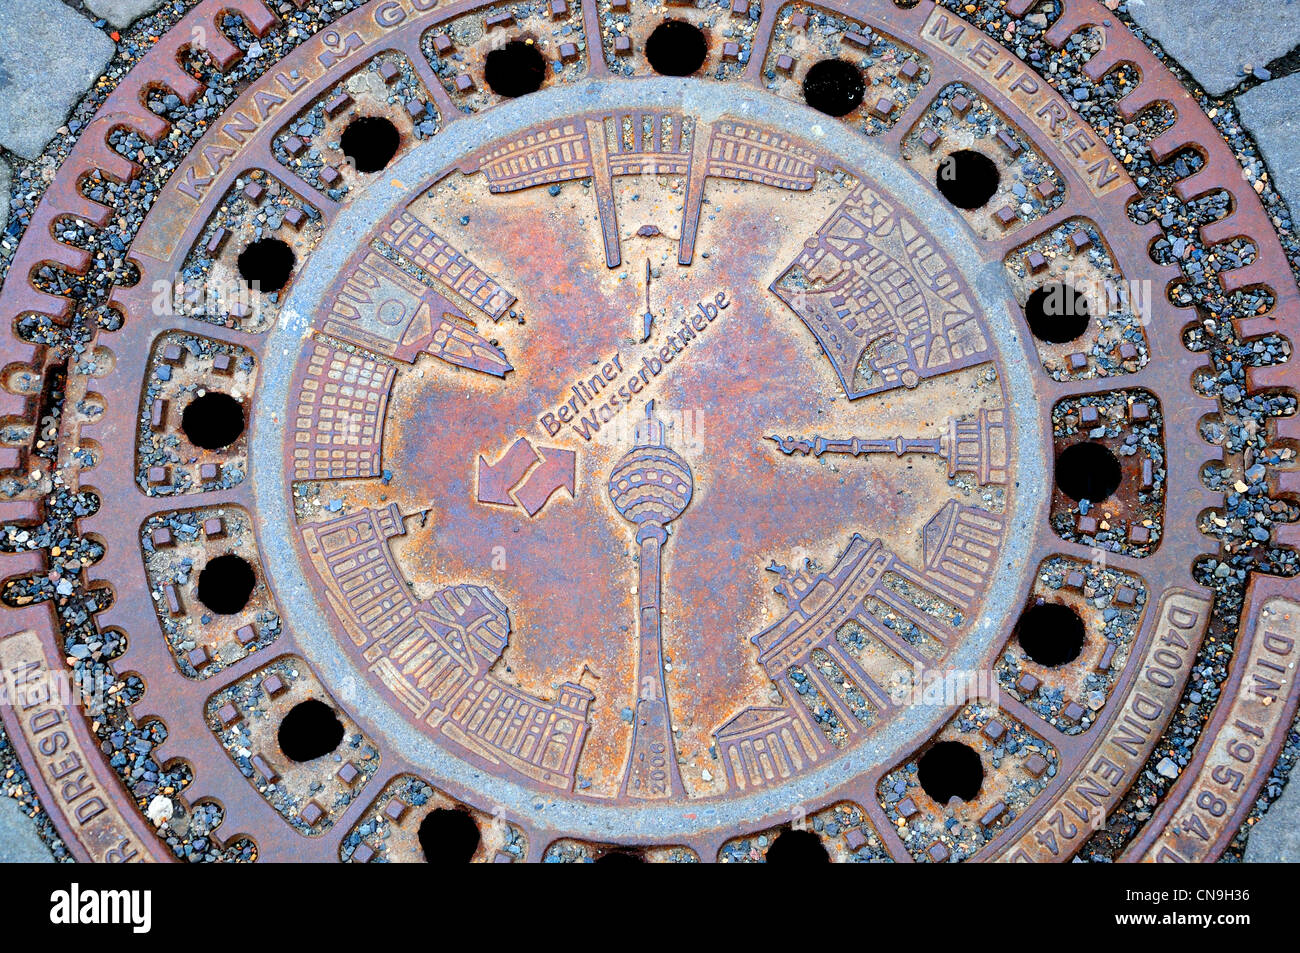 Berlin, Germany. Manhole cover with city sights Stock Photo